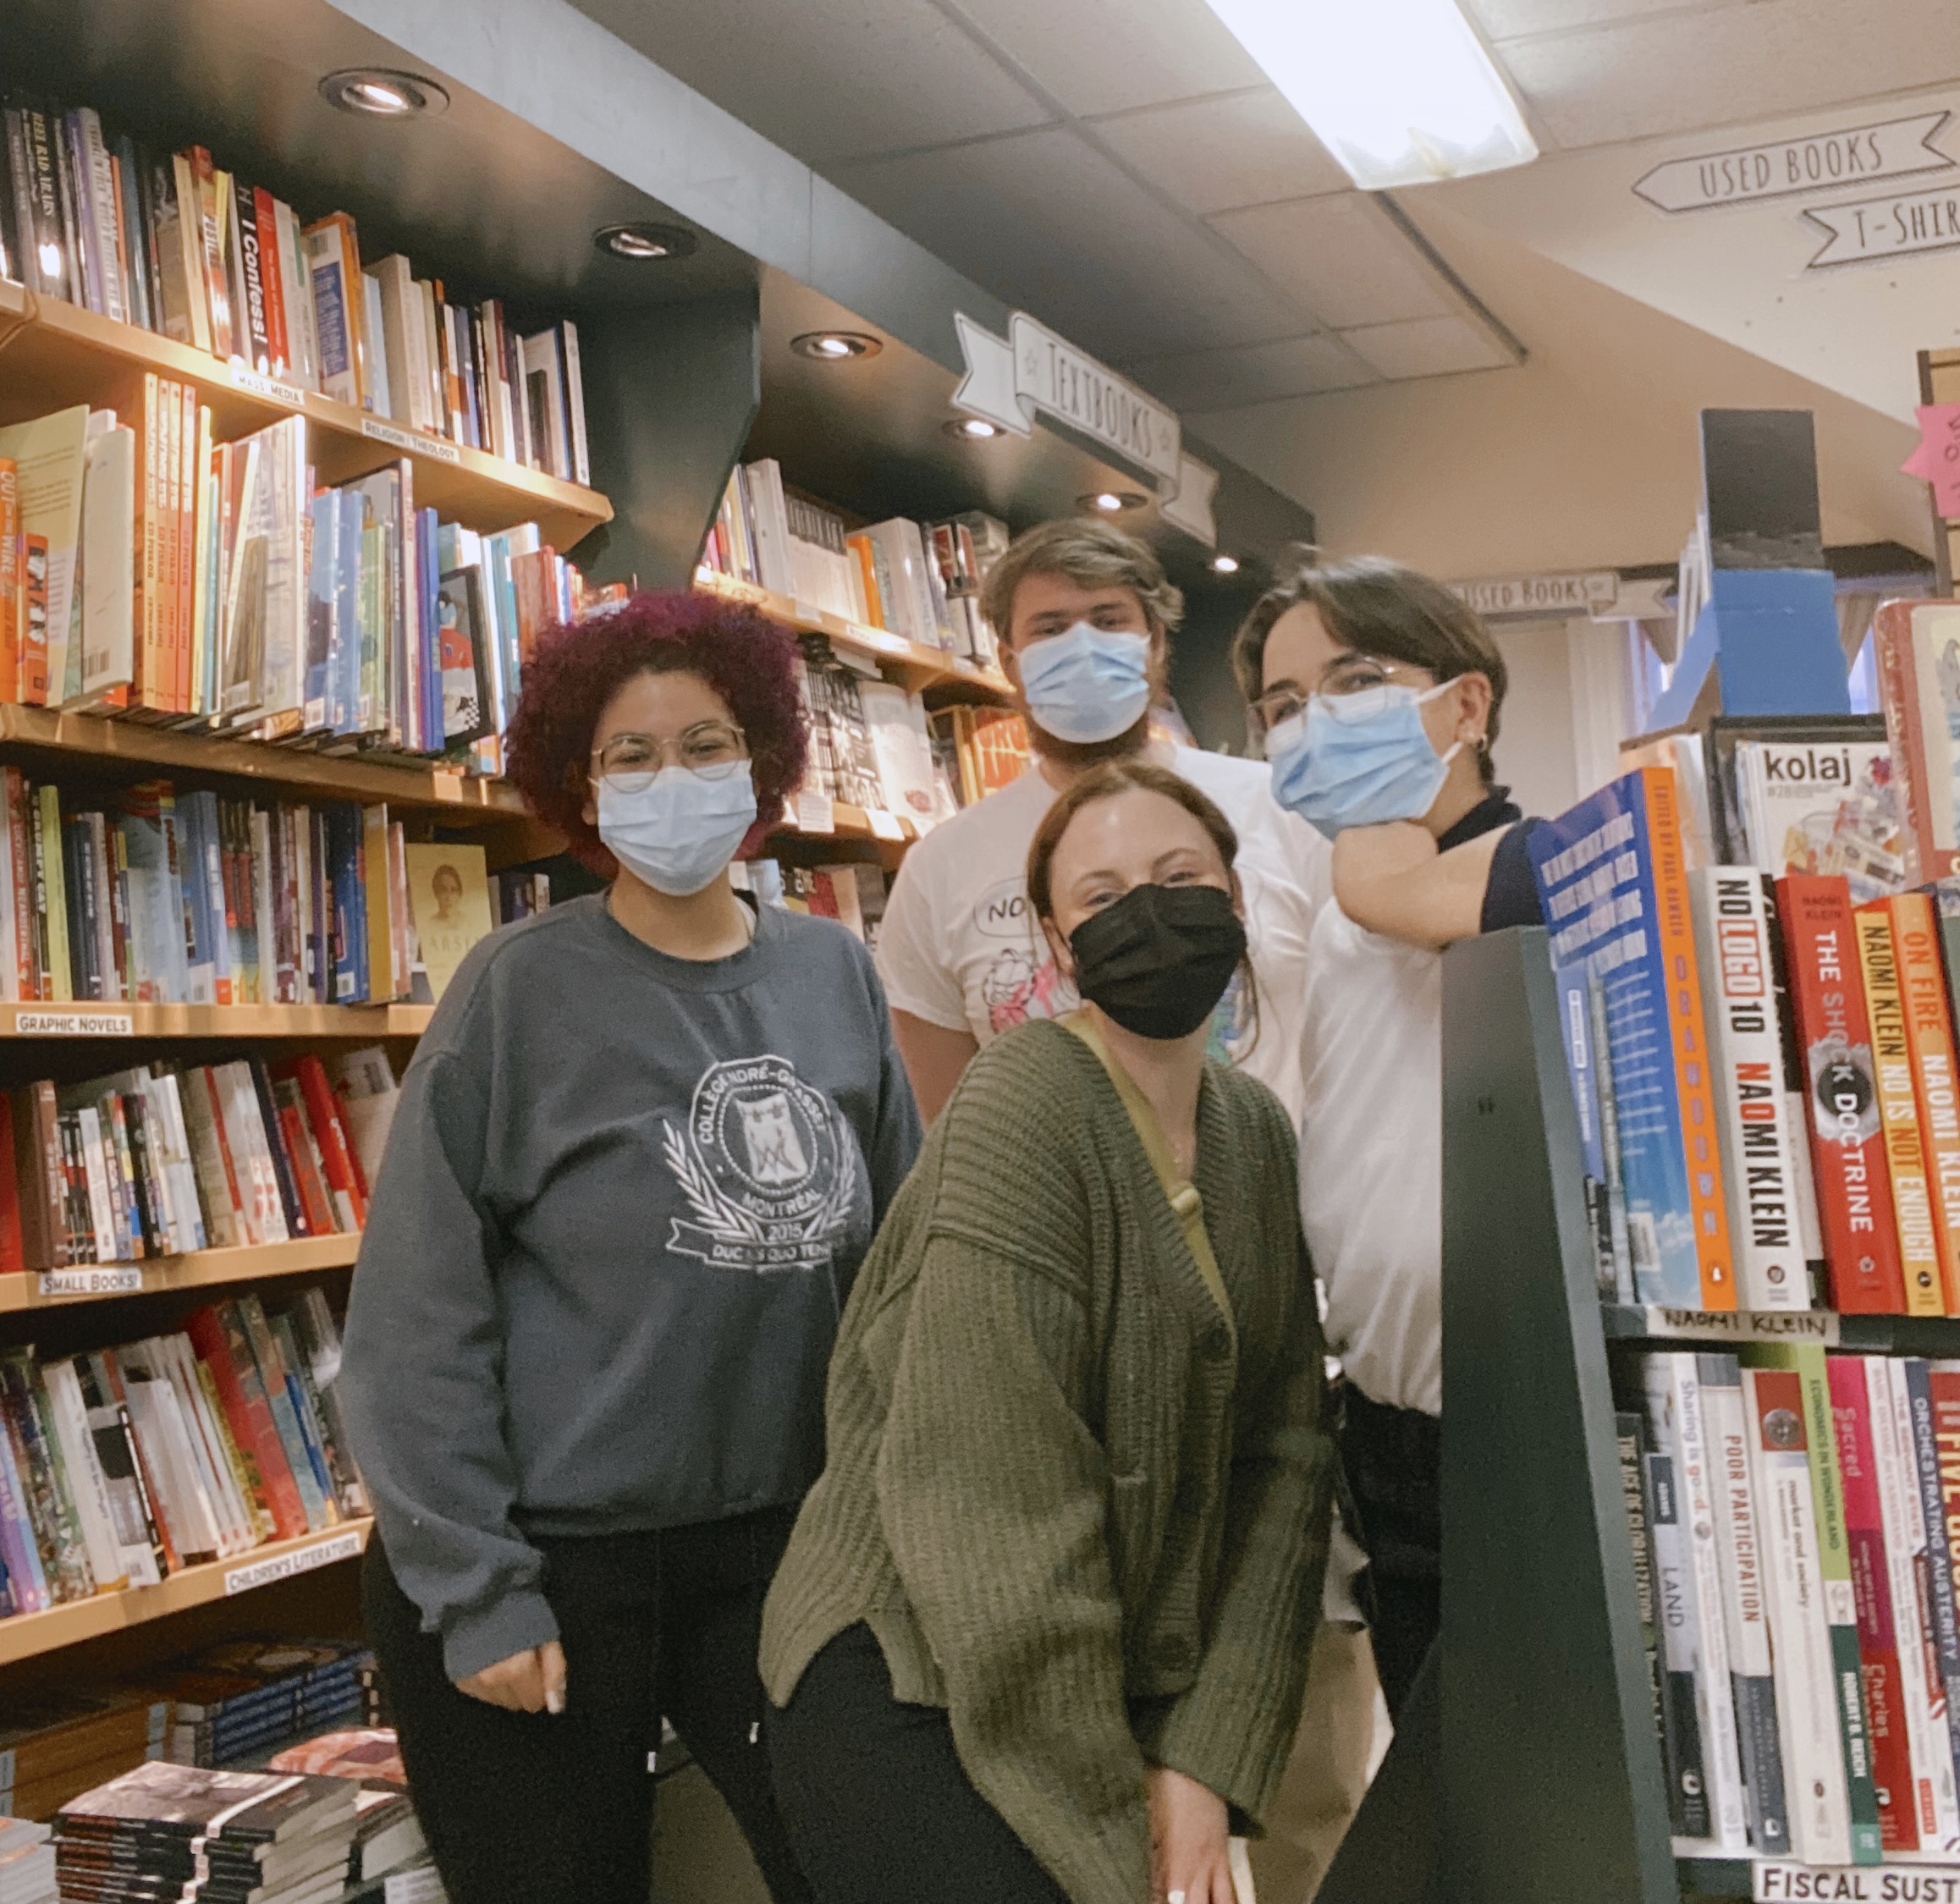 group of four people smiling in a bookstore surrounded by books.